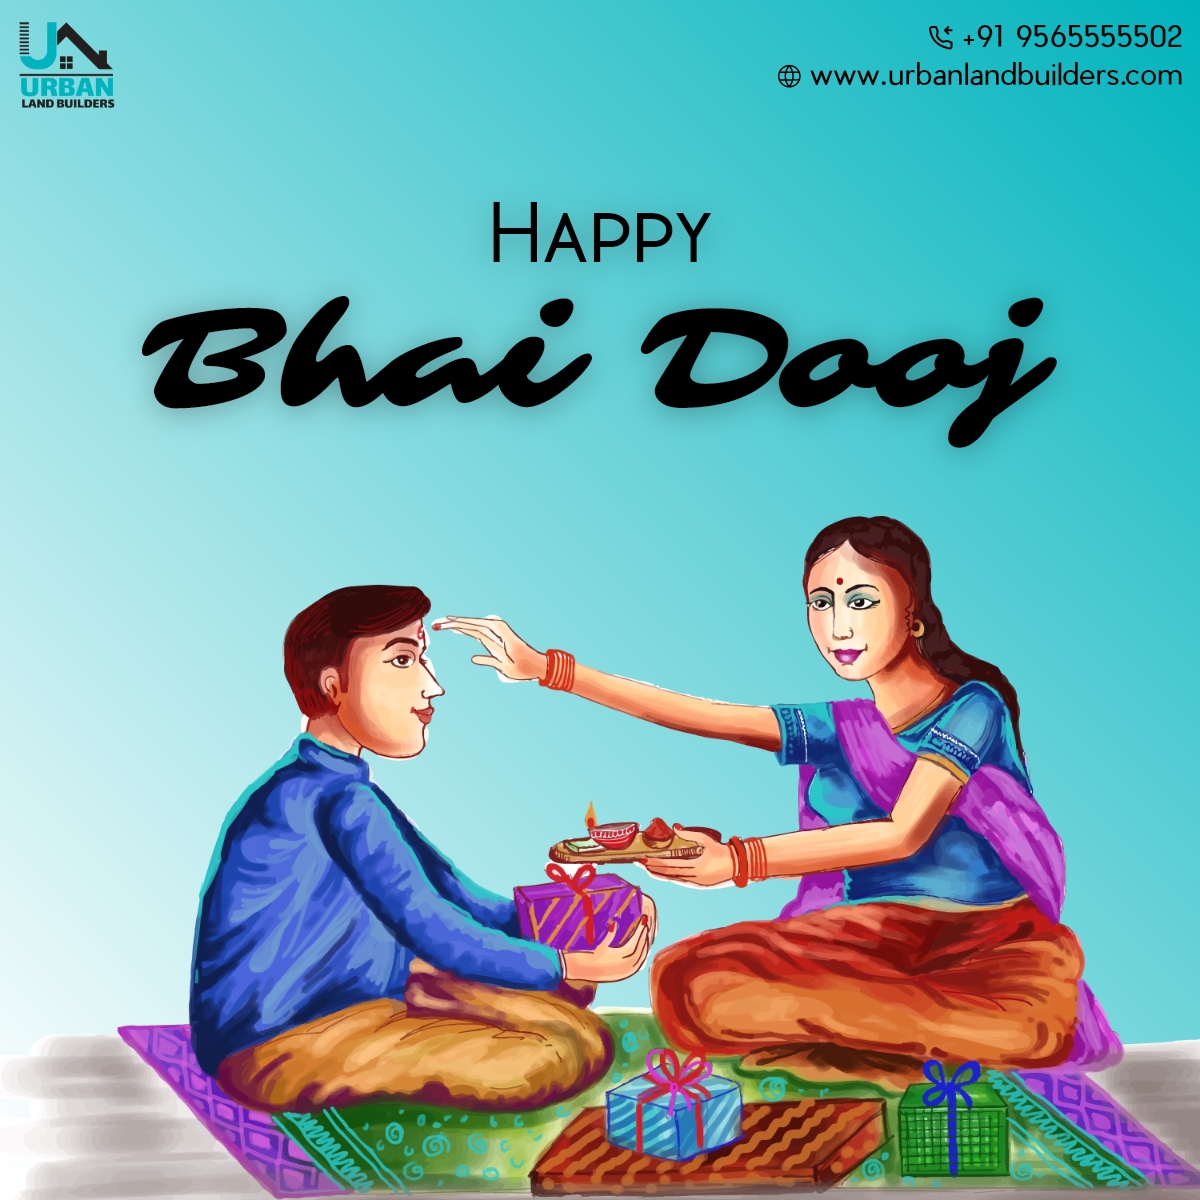 May this Bhai Dooj strengthen the bond between you and your sibling! May you both attain success and long-life! Wishing you a very Happy Bhai Dooj.

#bhaidooj #bhaidoojspecial #bhaidooj2023 #sibling #siblingbond #siblinglove #UrbanLandBuilders